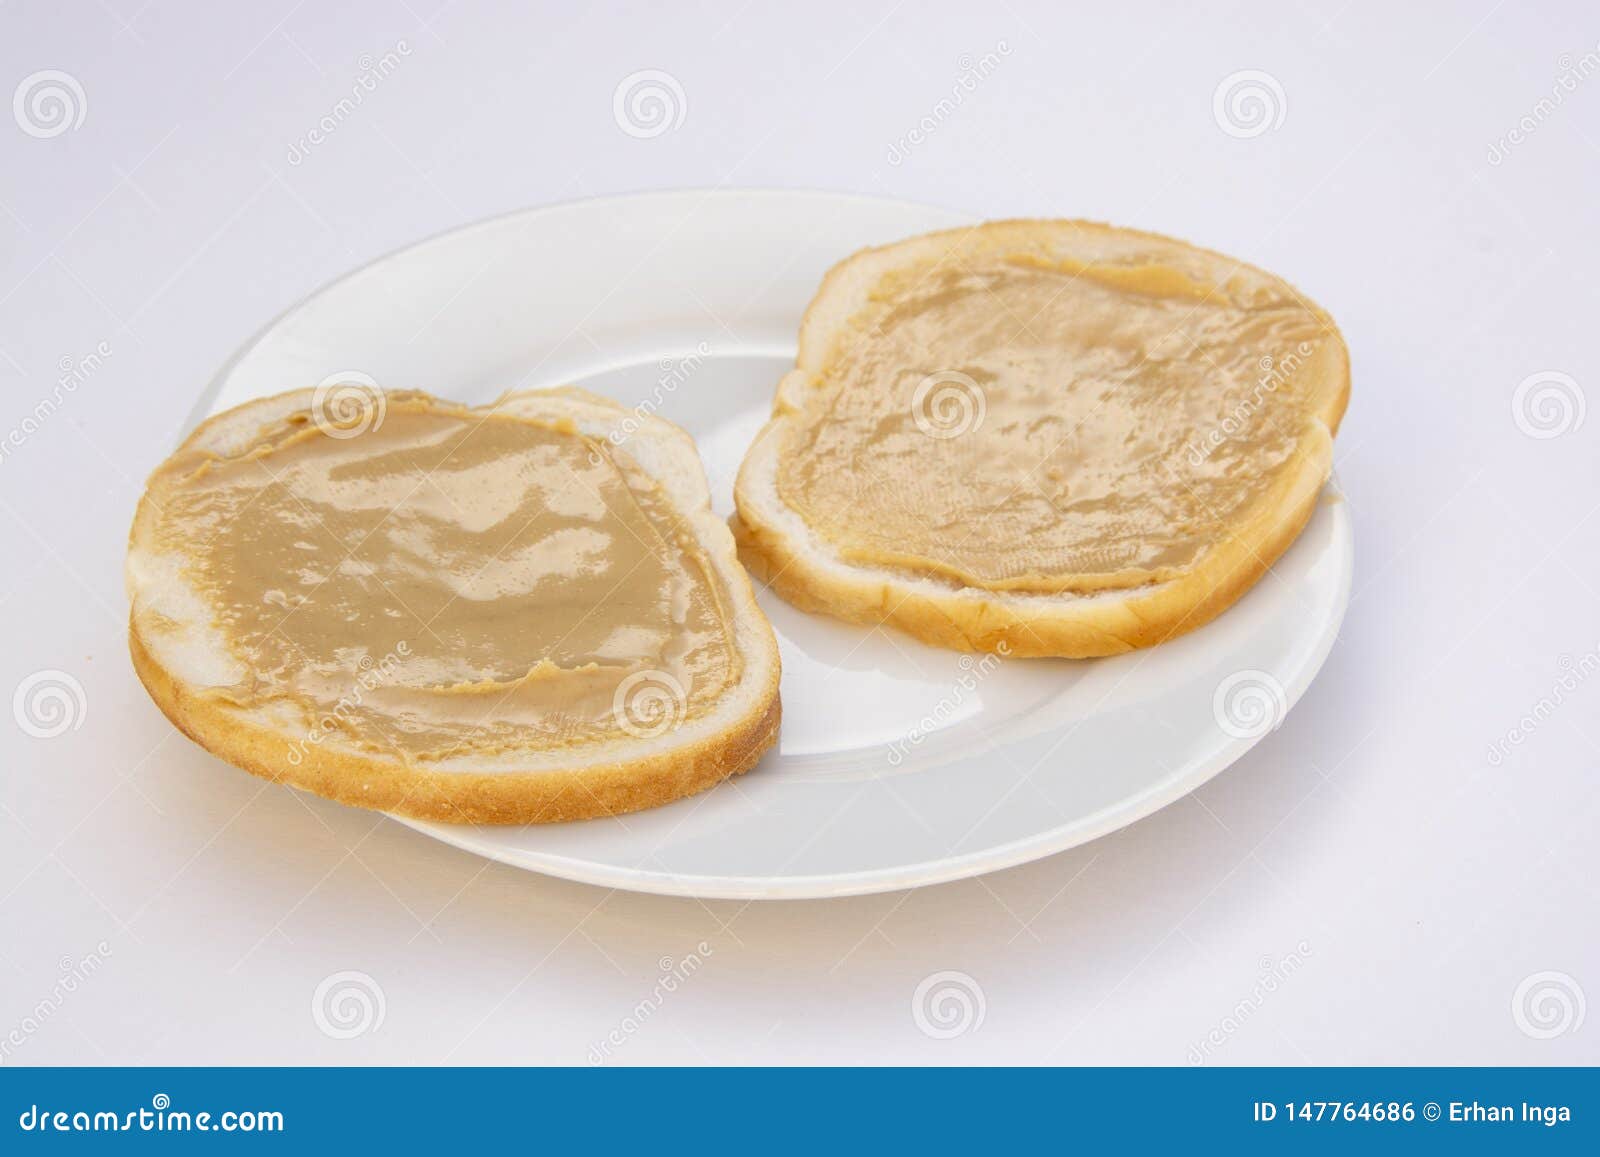 Peanut Butter Sandwich Breakfast Or Snack On White Background Stock Photo Image Of Bowl Groundnut